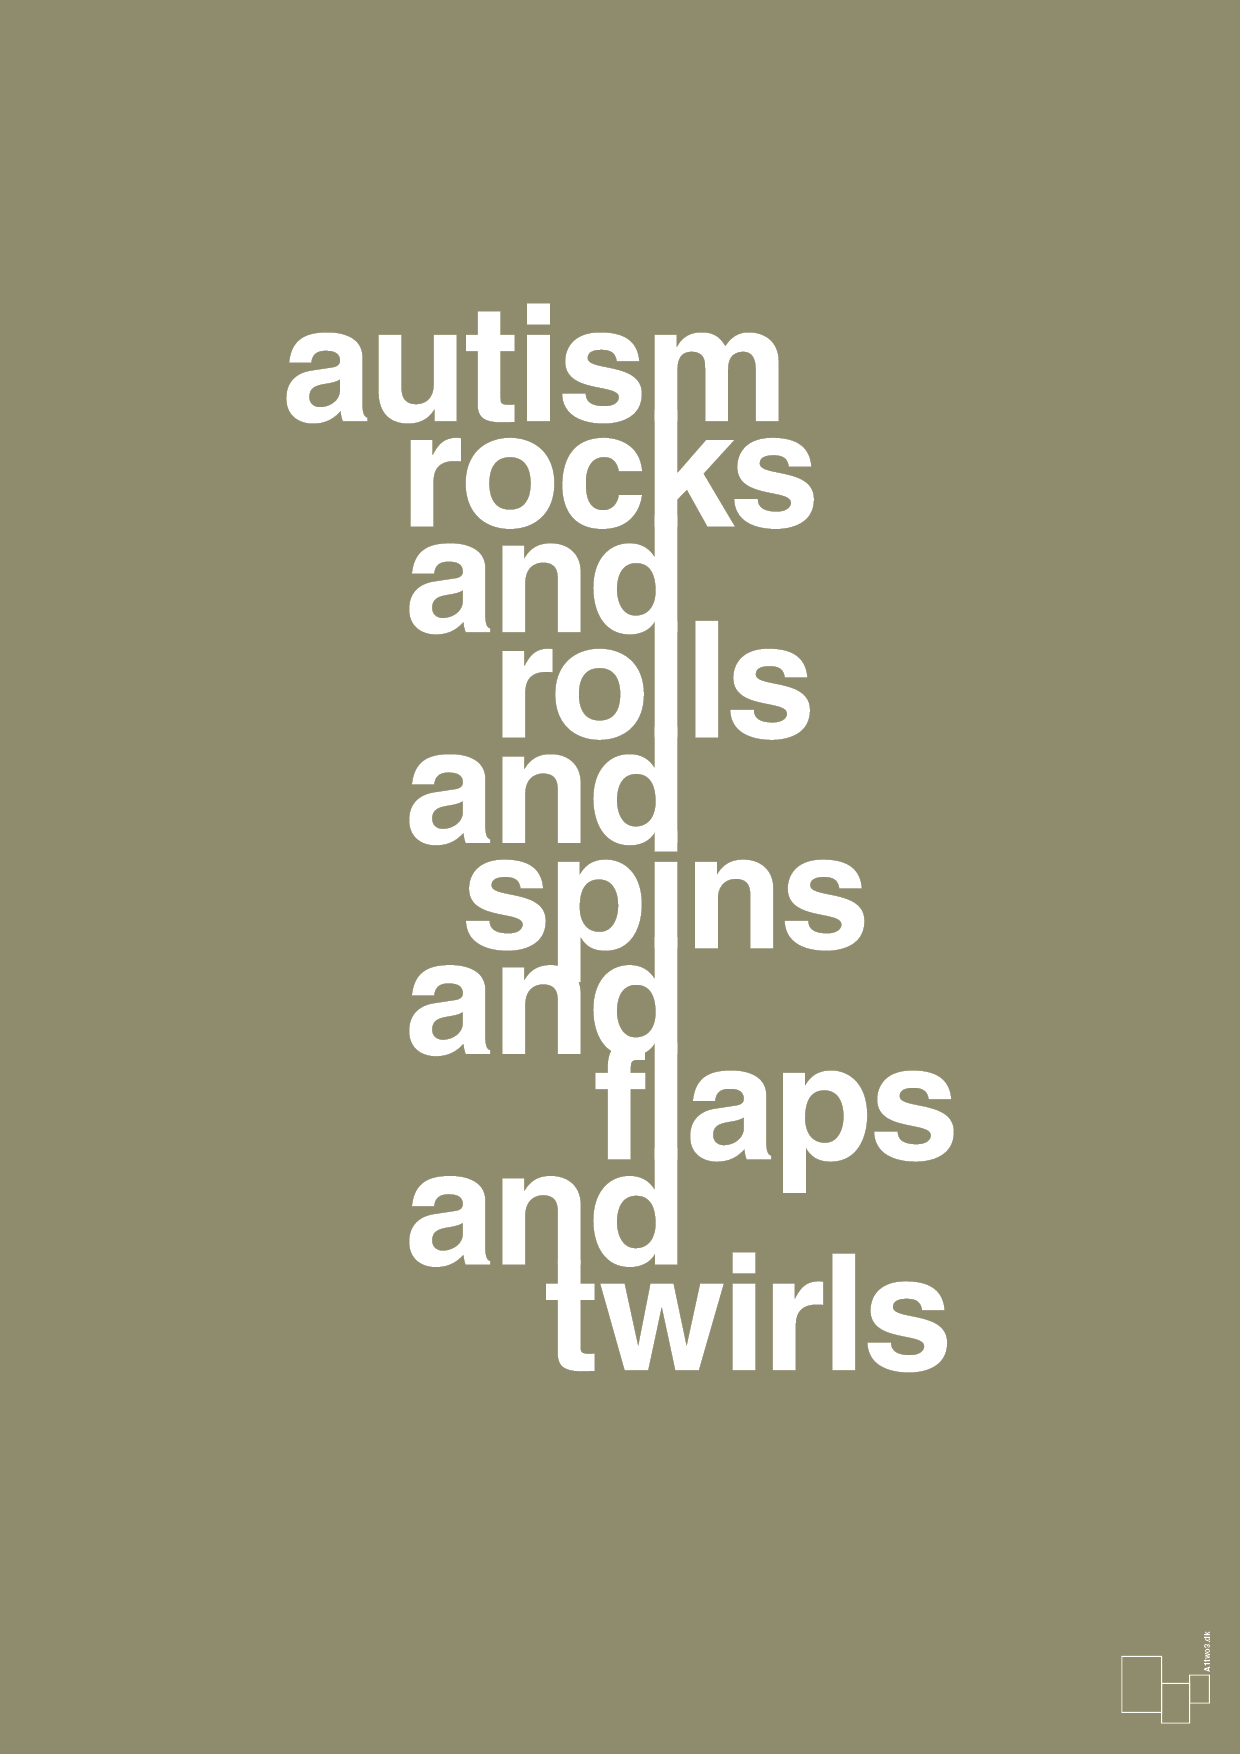 autism rocks and rolls and spins and flaps and twirls - Plakat med Samfund i Misty Forrest